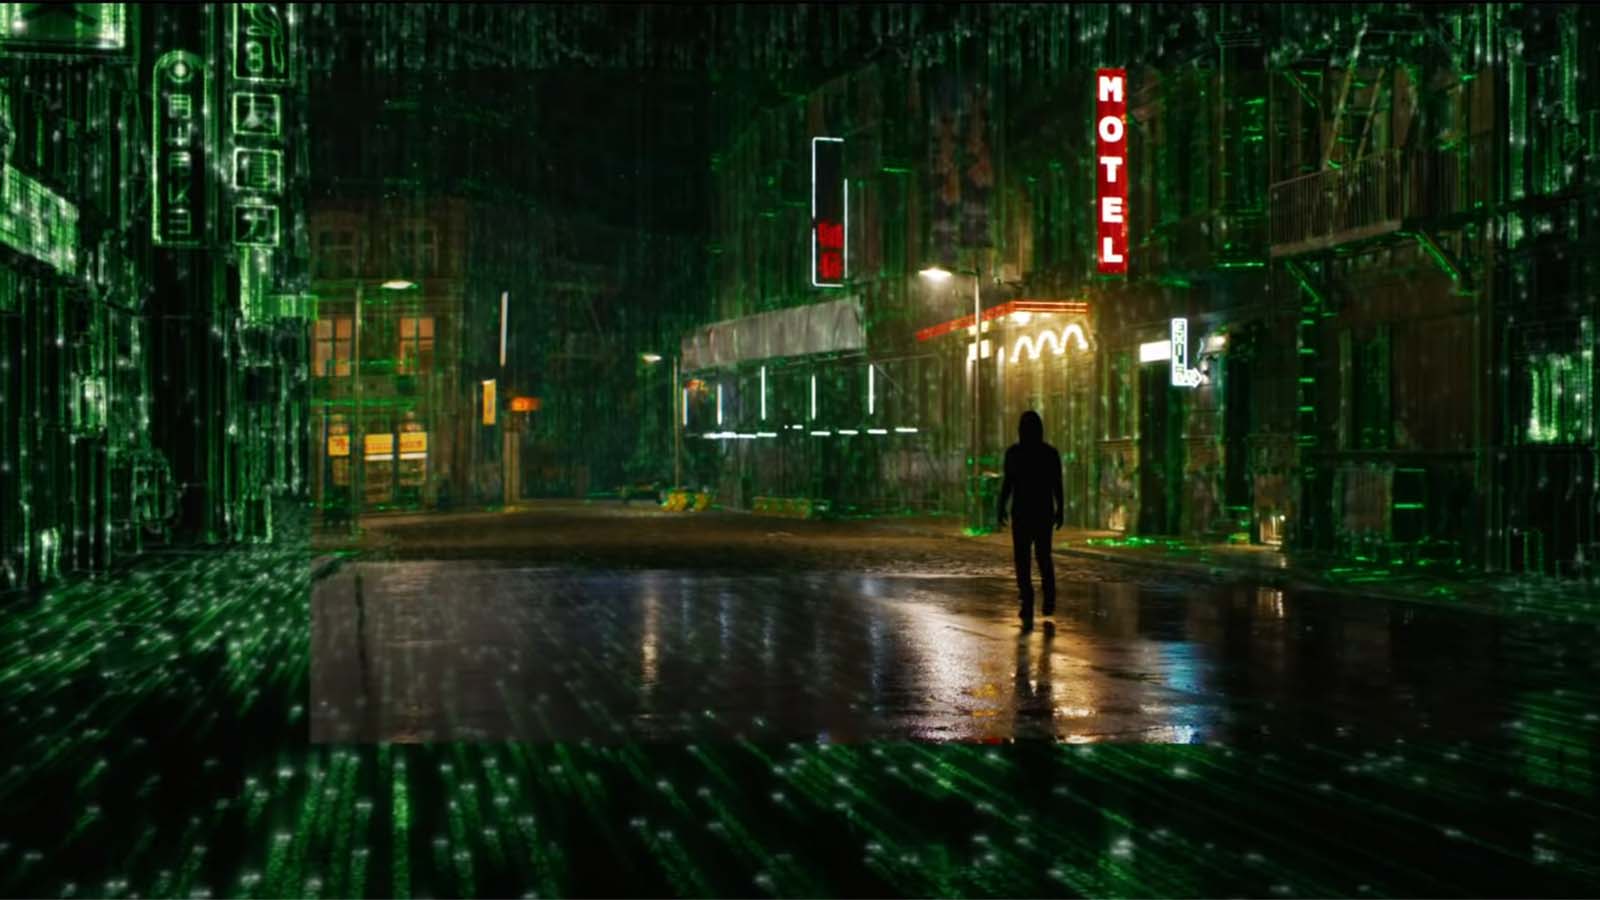 Neo finds himself in a narrow render window in the matrix.